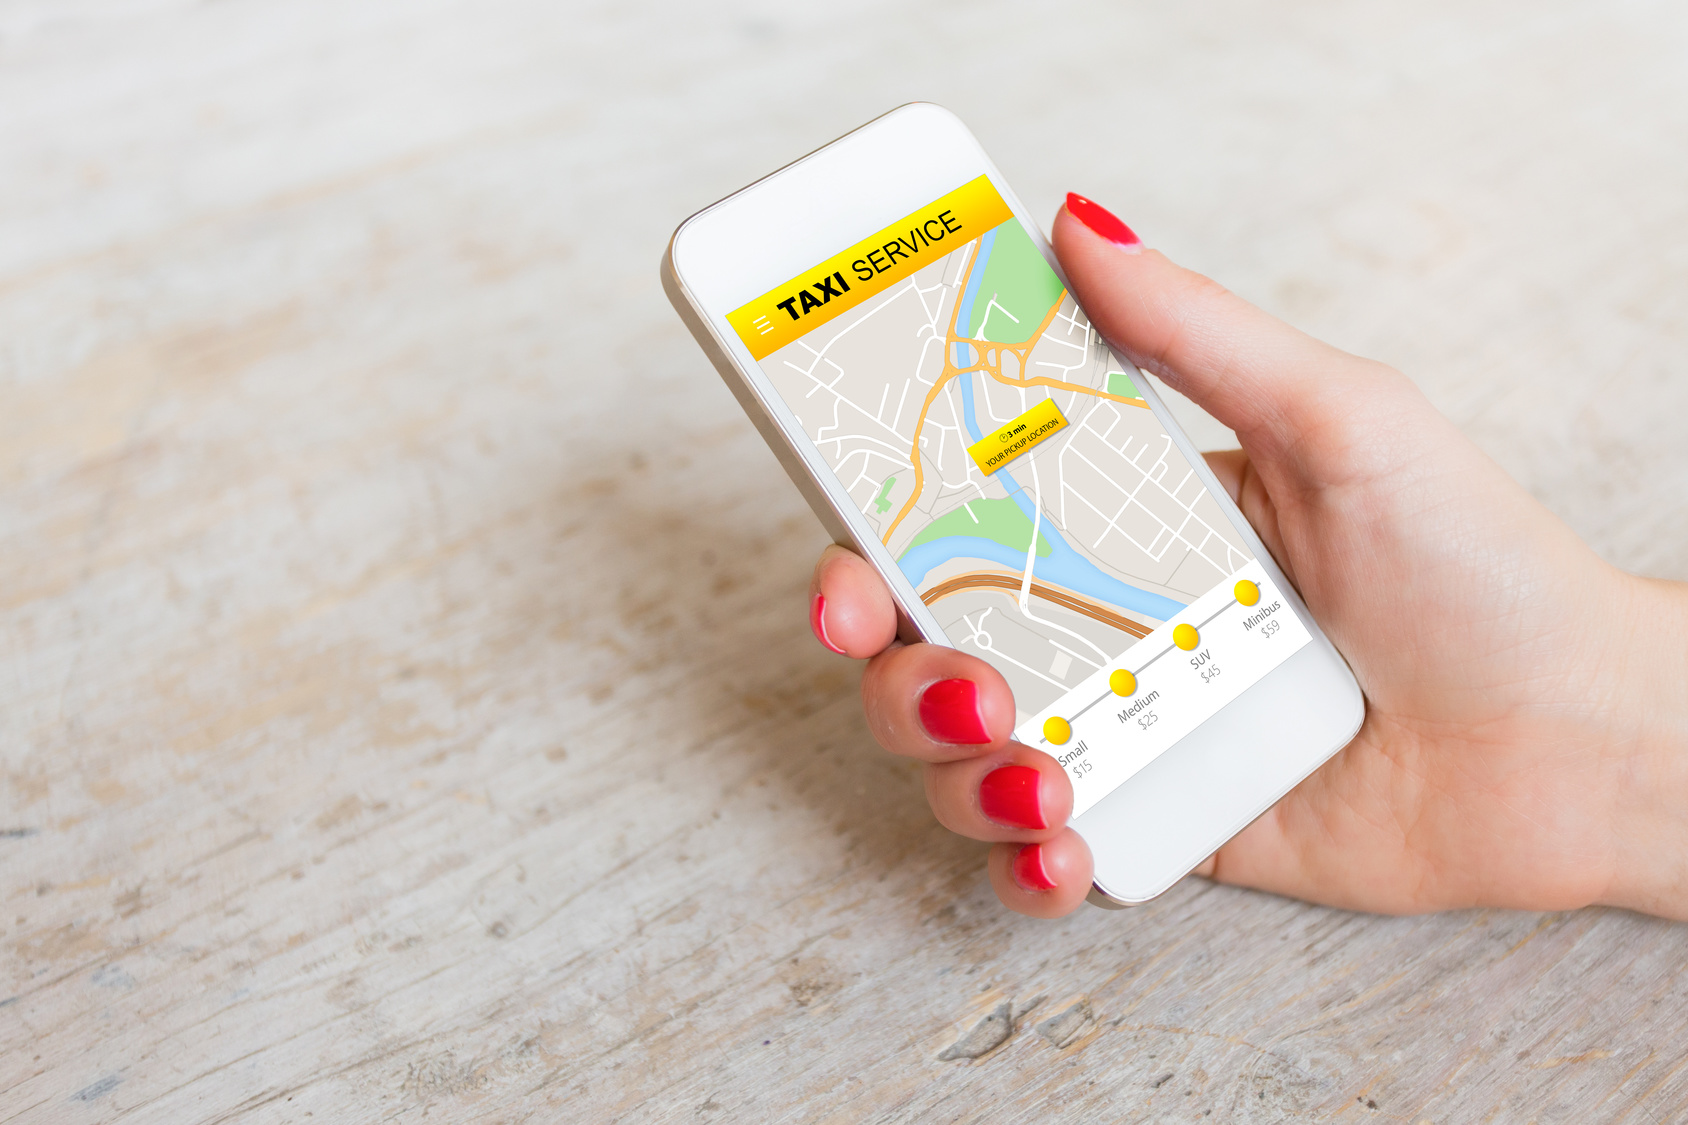 Taxi service app on mobile phone